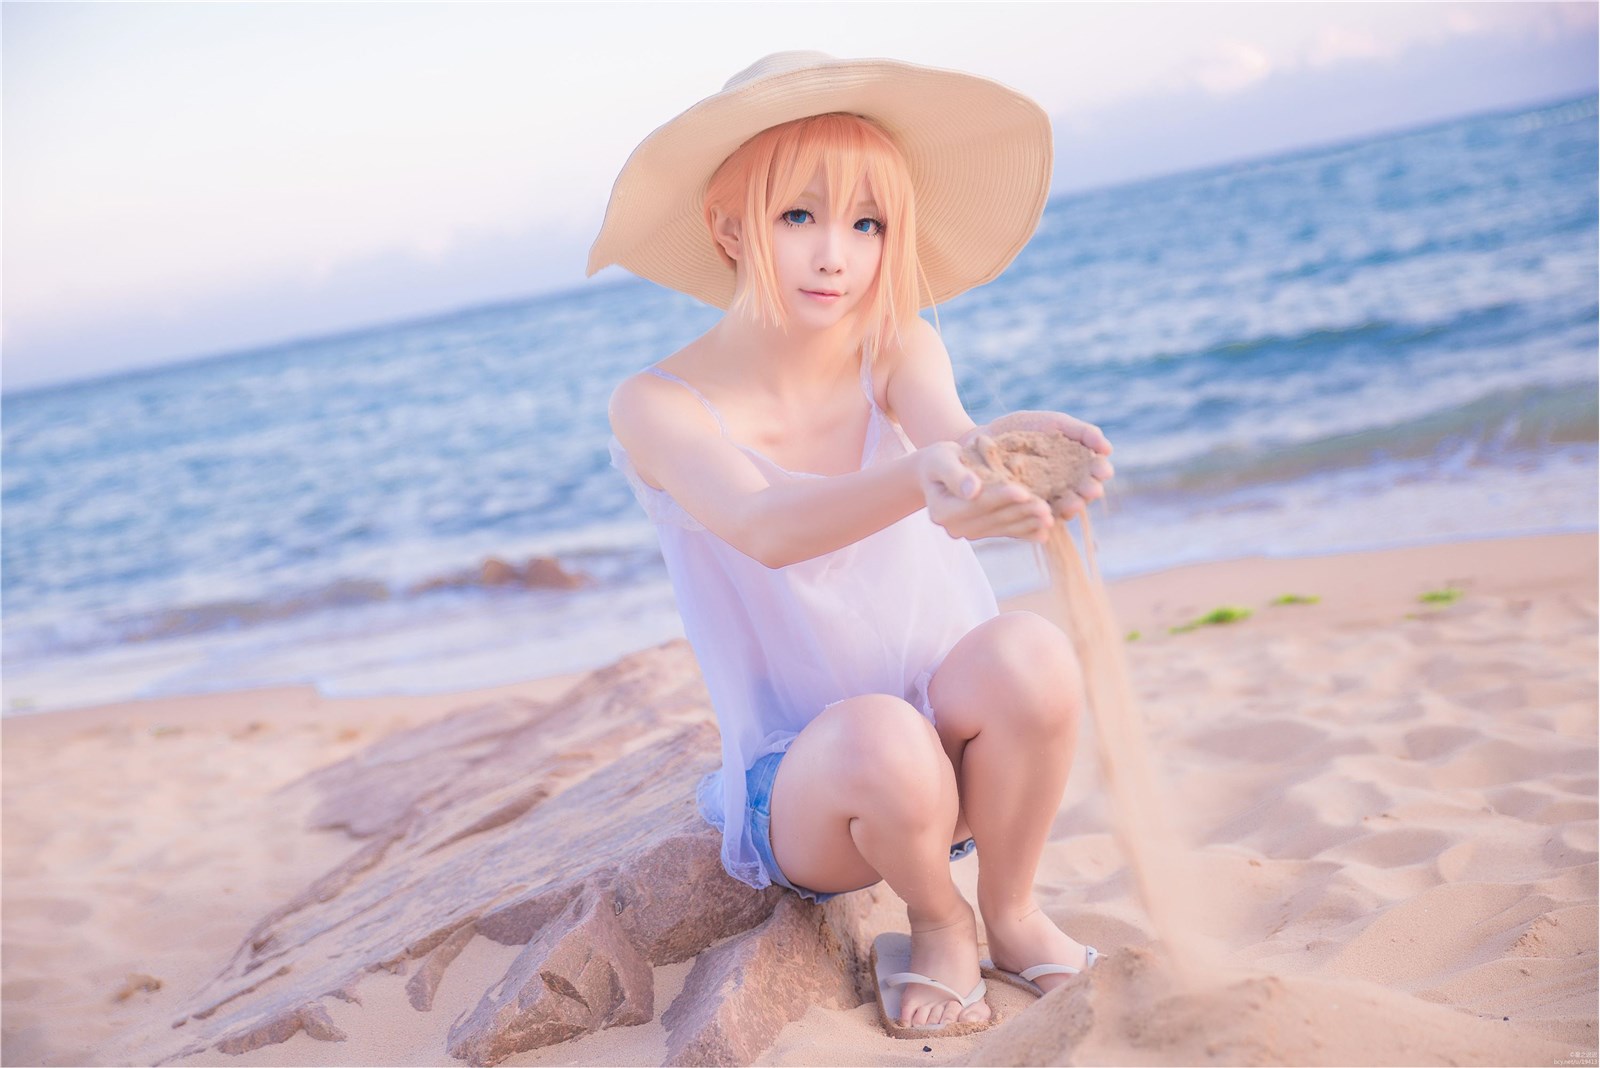 Star's Delay to December 22, Coser Hoshilly BCY Collection 4(12)